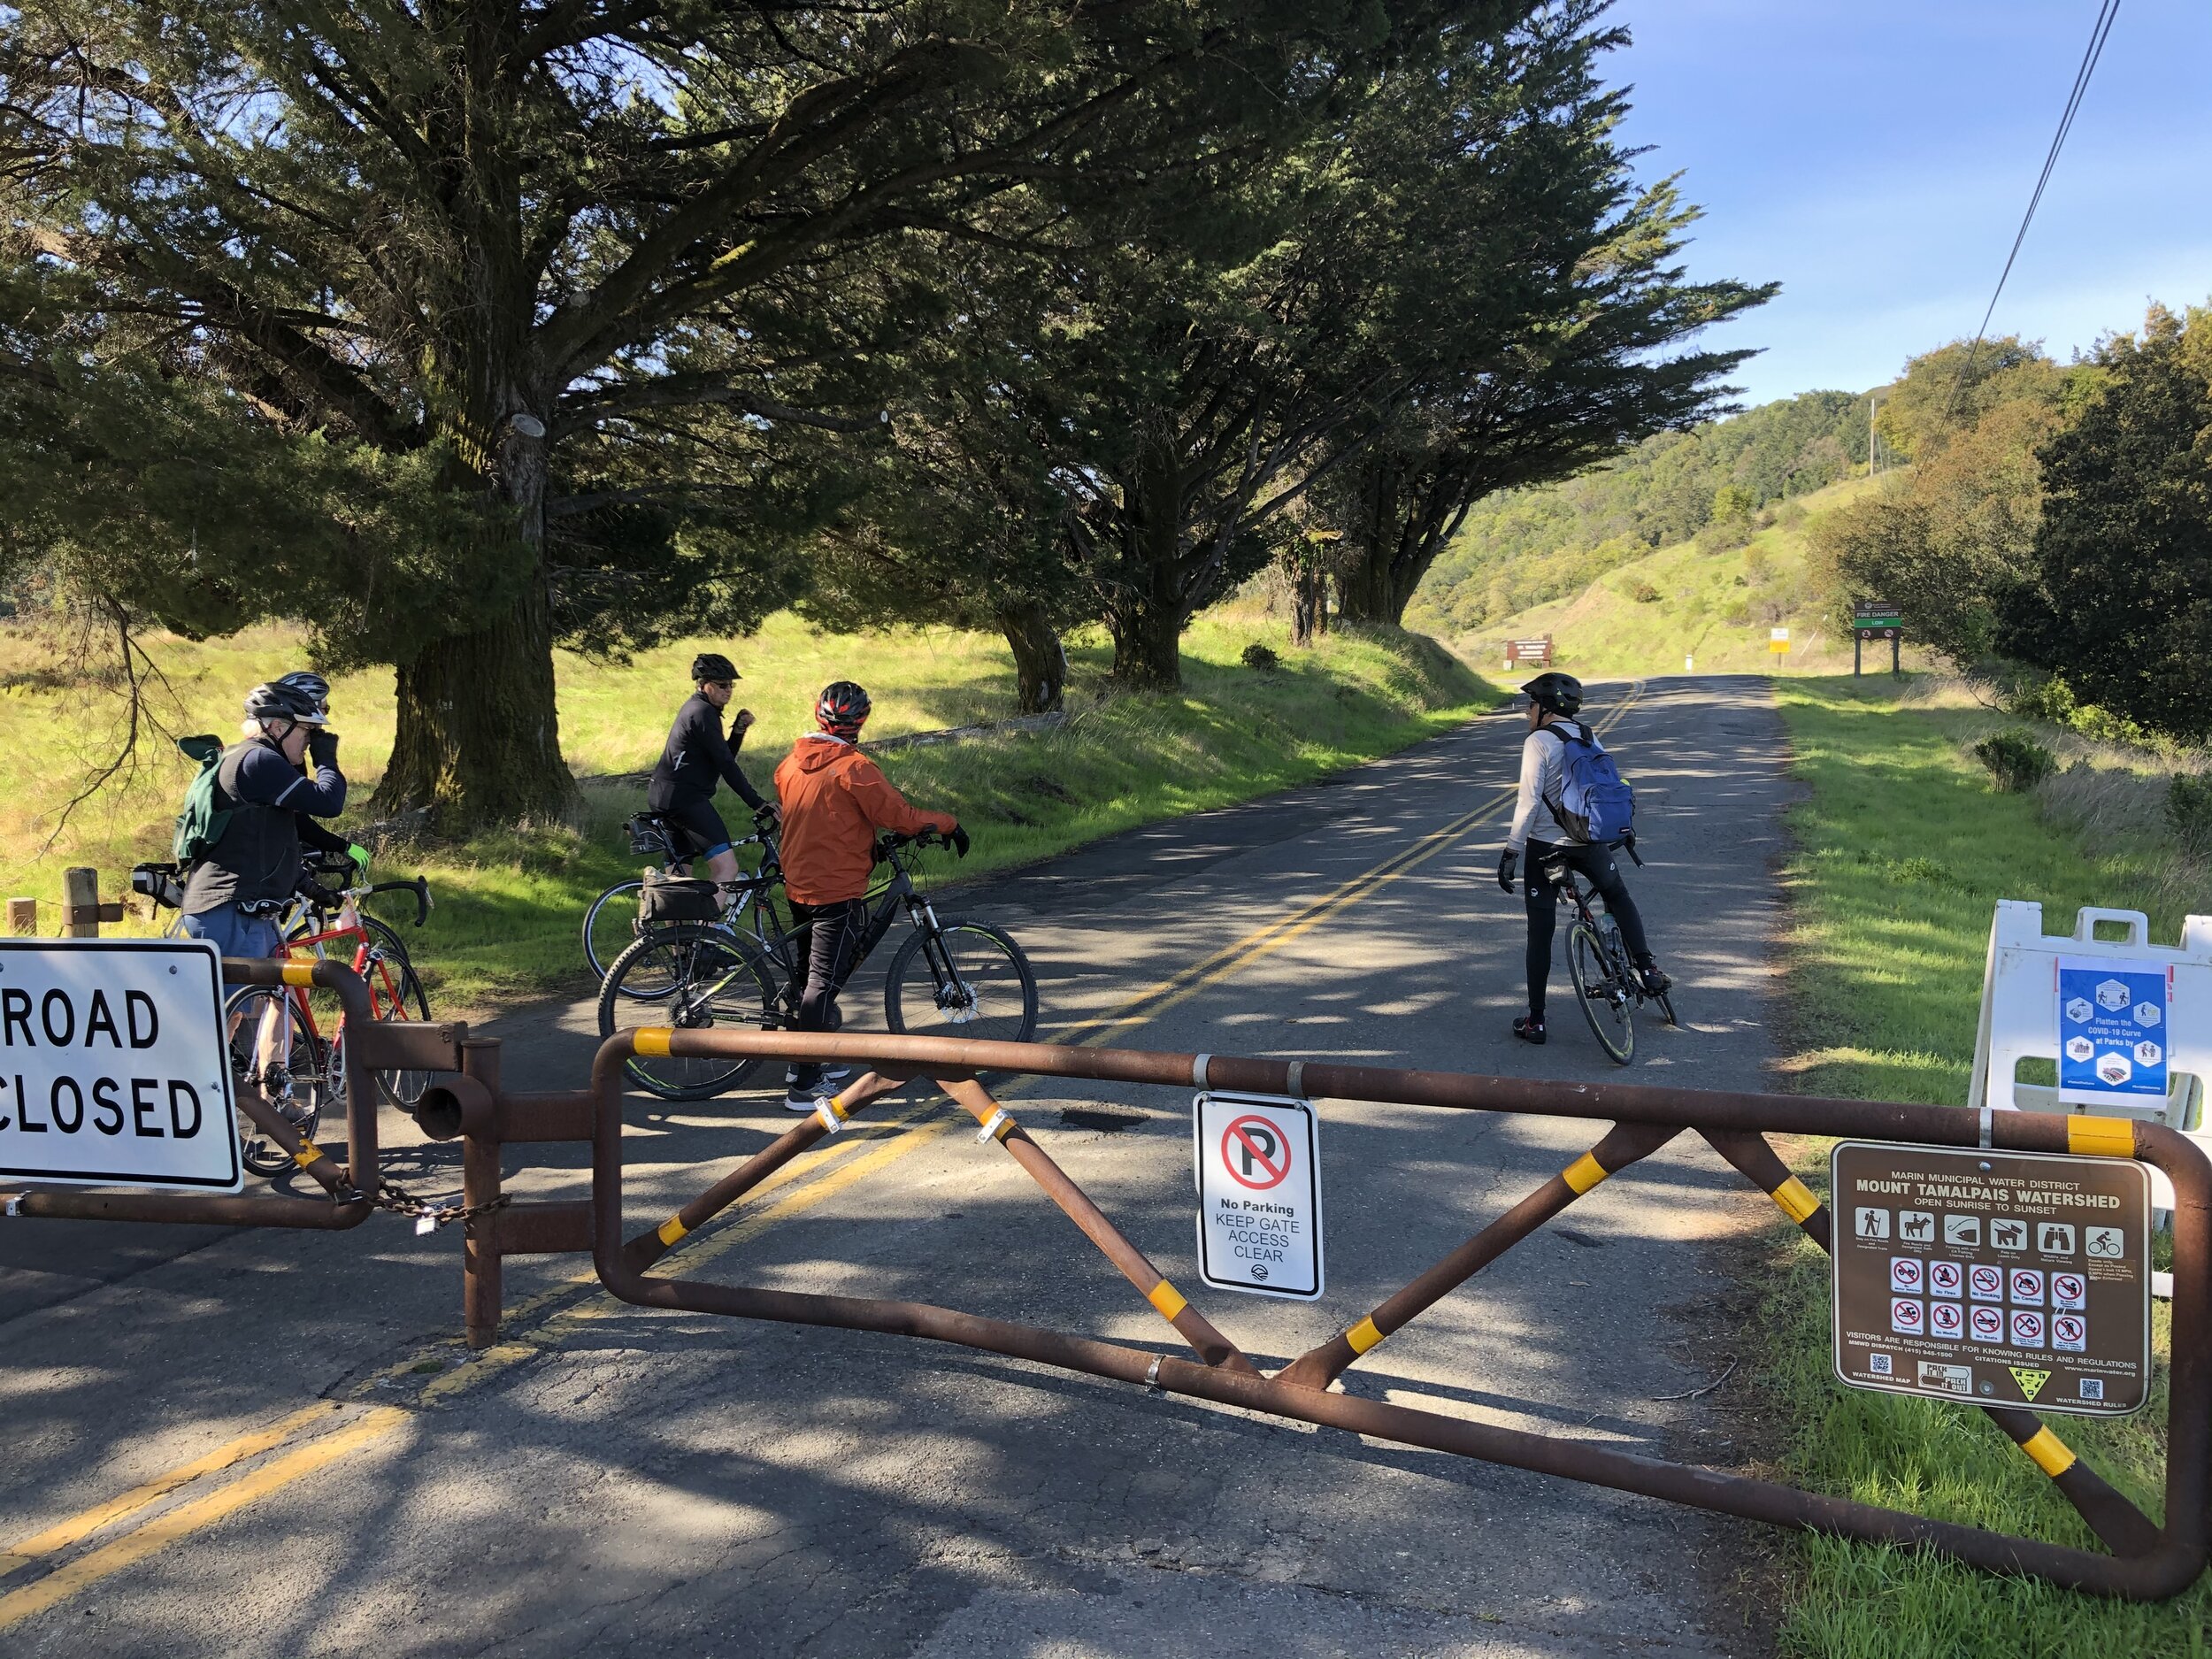 April 2020, fire danger closed Fairfax-Bolinas Road to motor vehicles, BUT NOT bicycles!